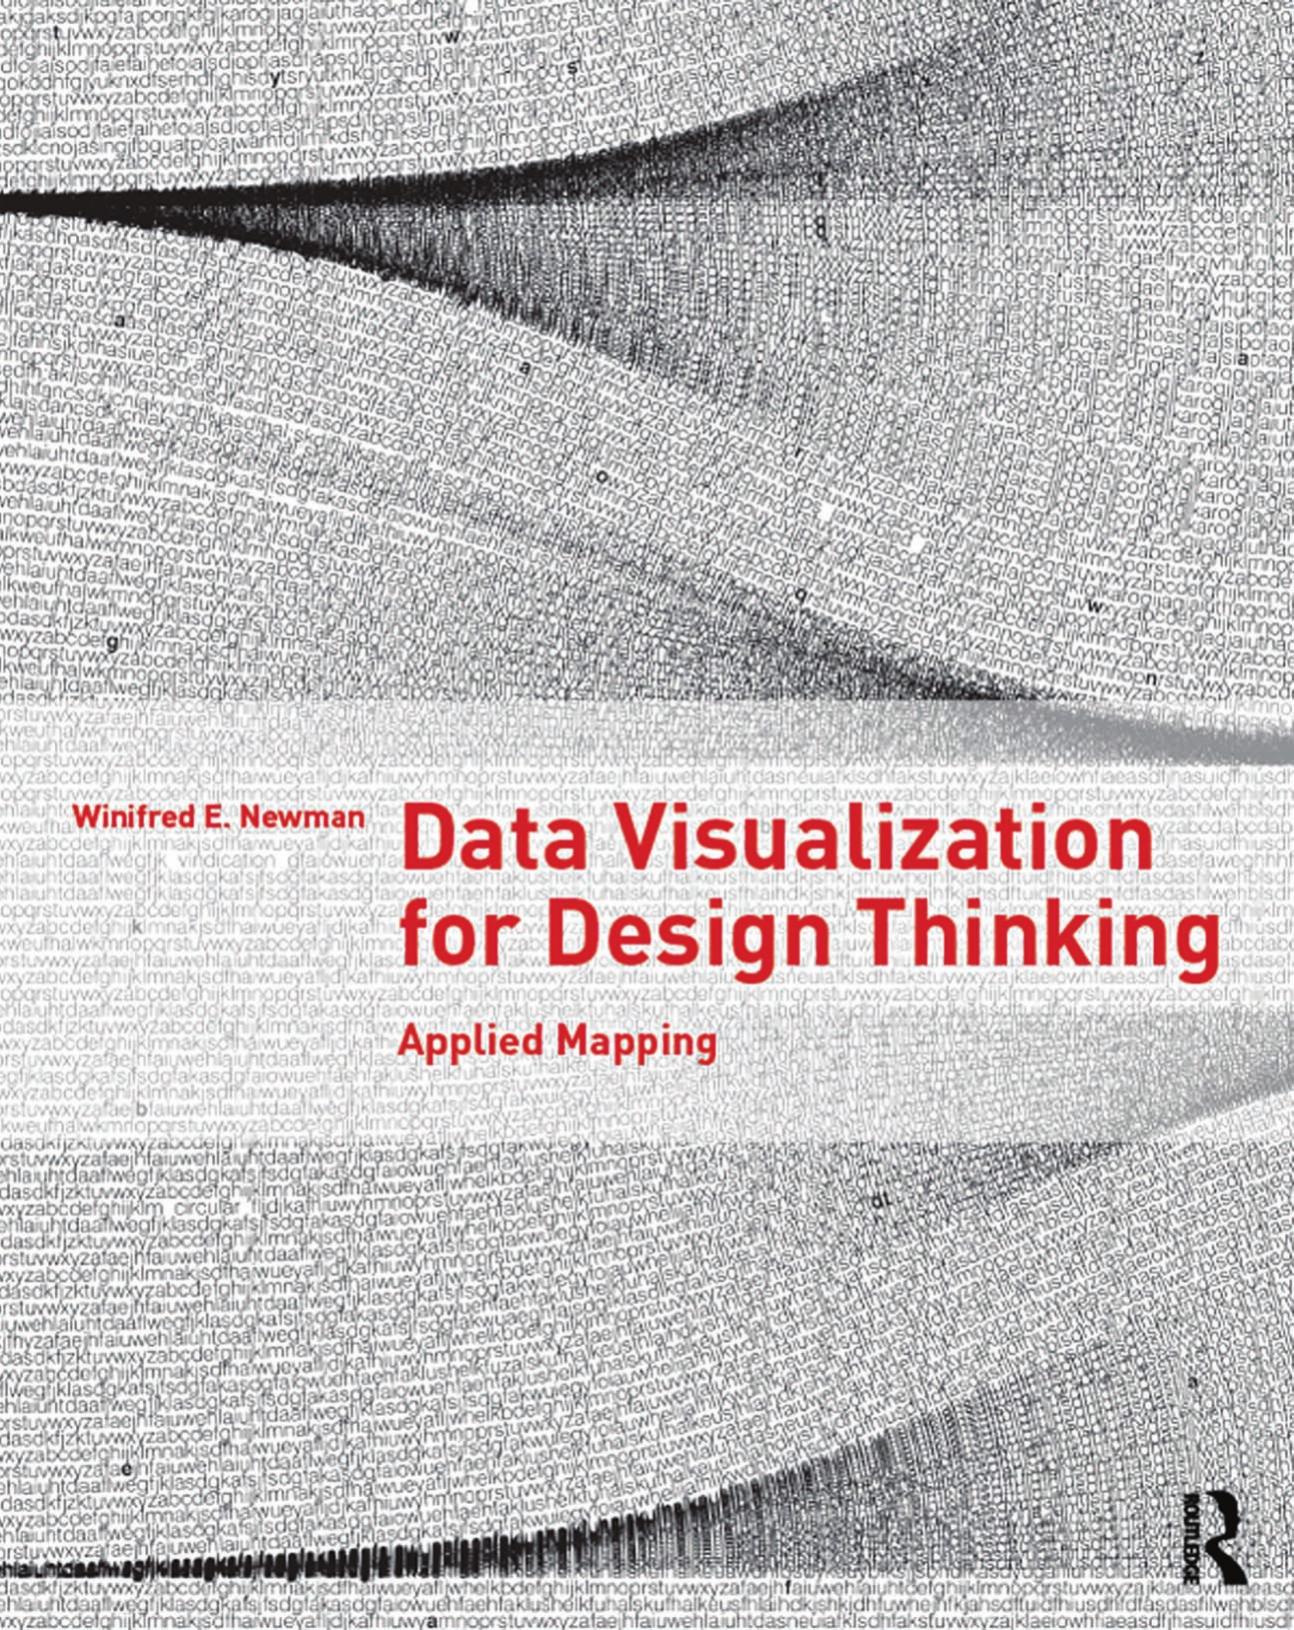 Data Visualization for Design Thinking: Applied Mapping